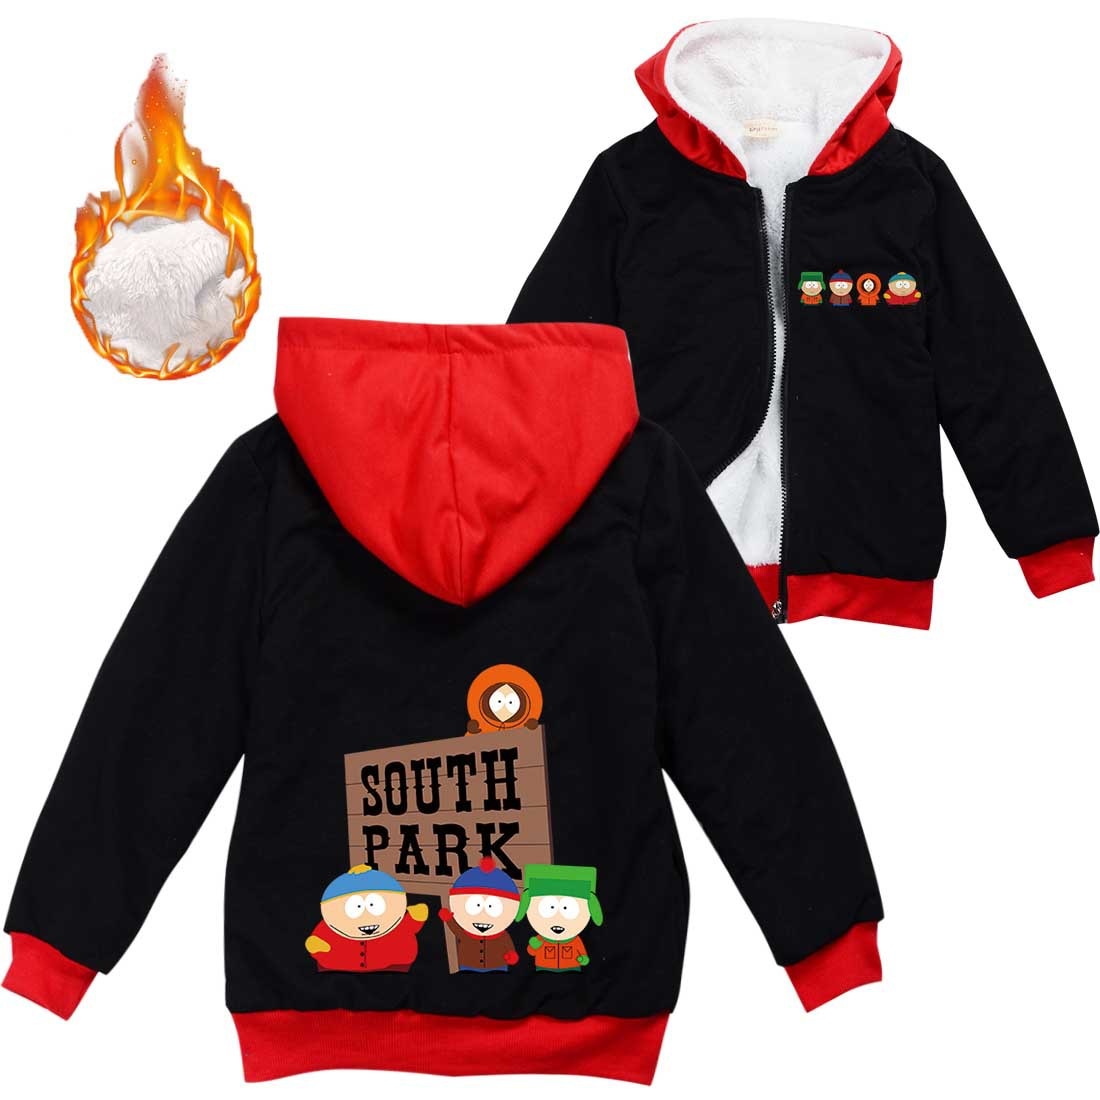 Anime S Southes Park Clothes Kids Warm Thick Velvet Hoody Jacket Teenager Boys Clothes Baby Girls 5 - South Park Plush